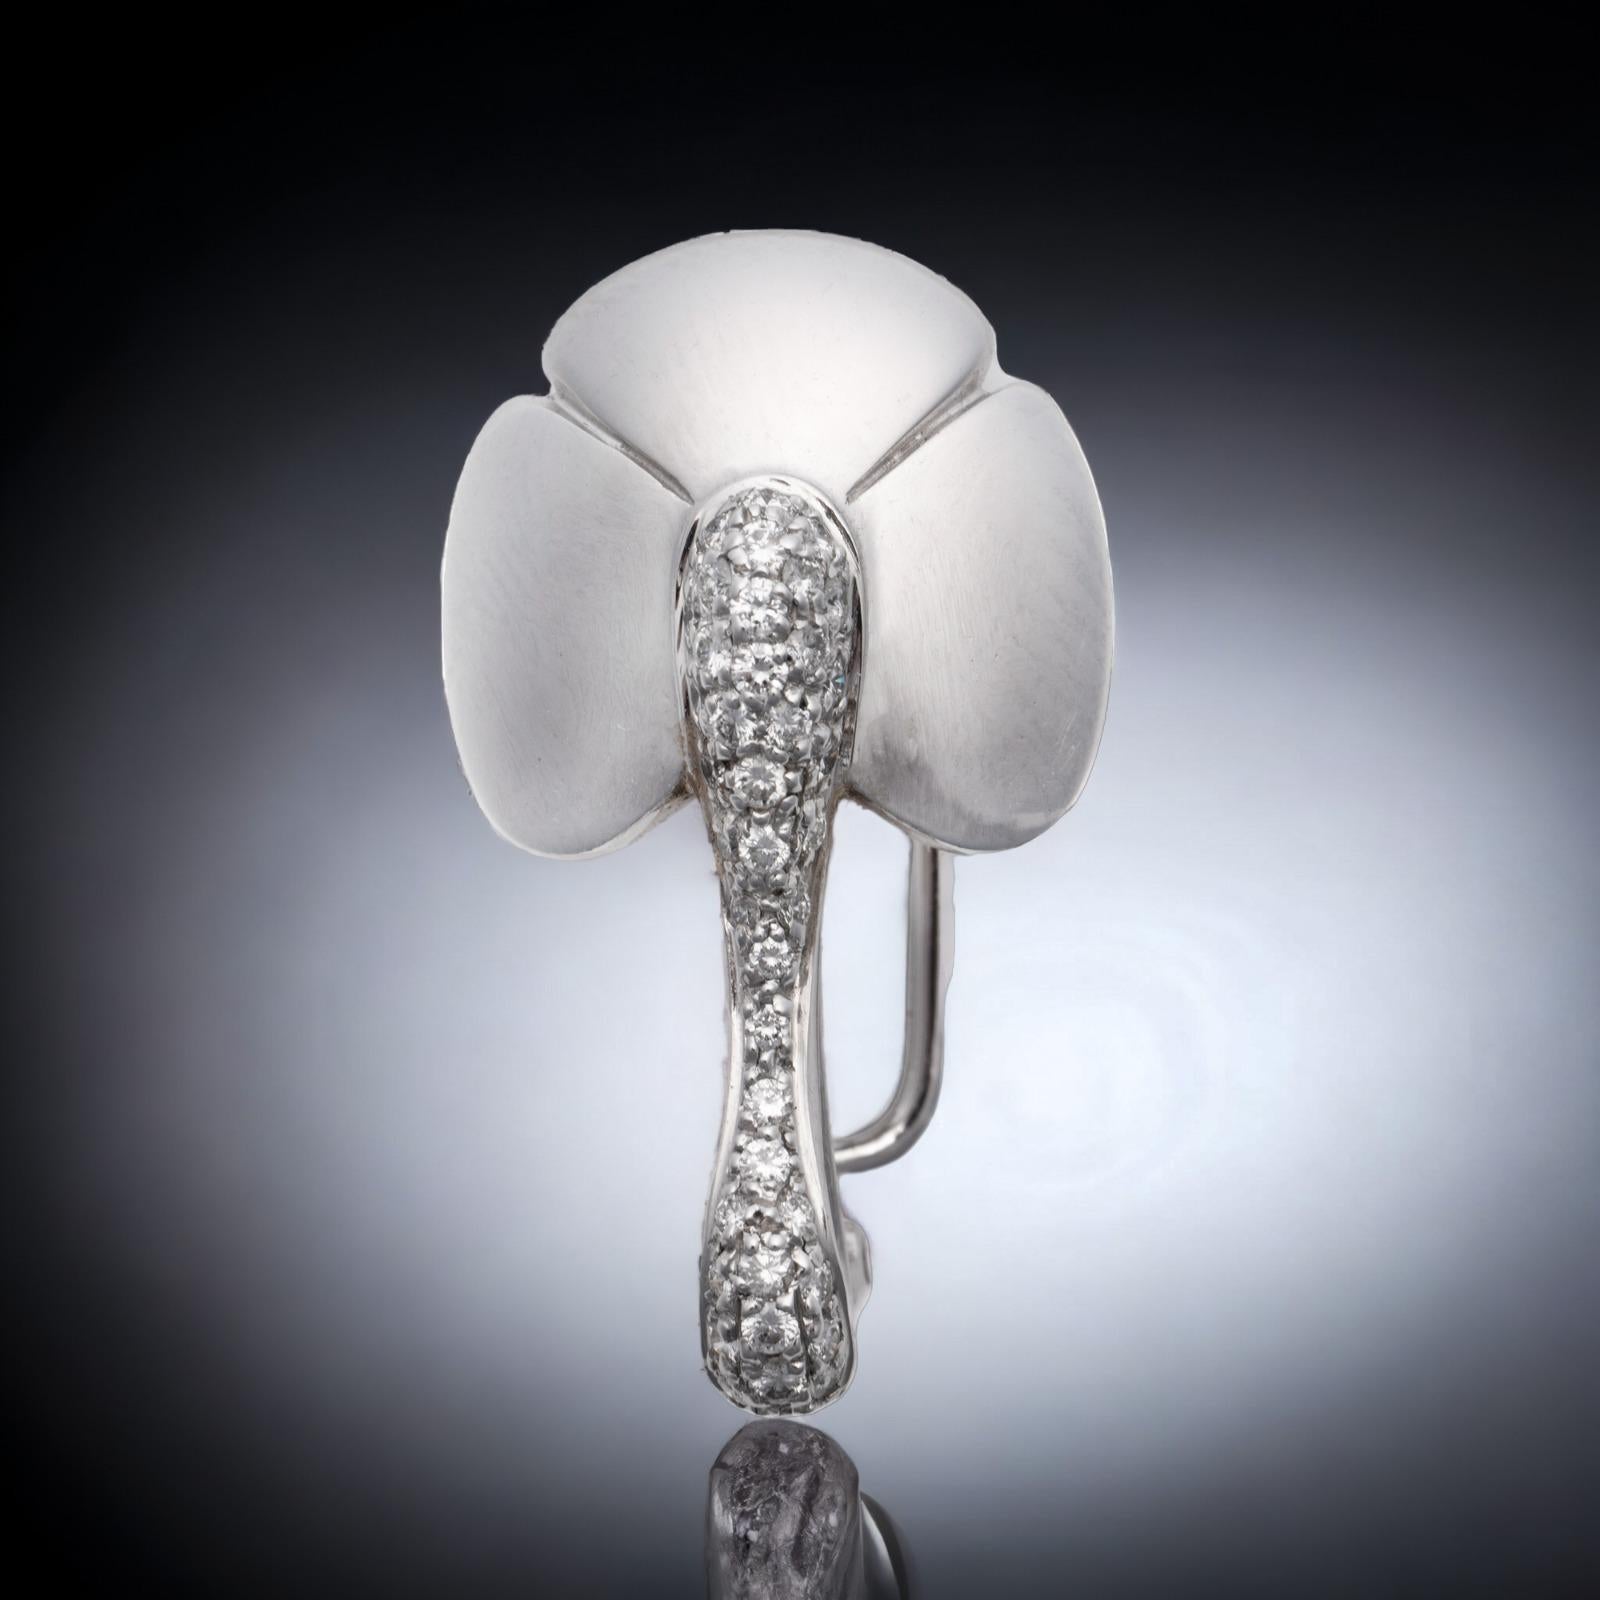 Chaumet 18kt white gold flower pin brooch/pendant set with 0.80 ct. diamonds. 
Maker: Chaumet
Made in France, Paris 
Fully hallmarked with serial number. 

Dimensions -
Length x width x height: 3.5 x 2 x 1 cm 
Weight: 10.00 grams

Diamonds - 
Cut: